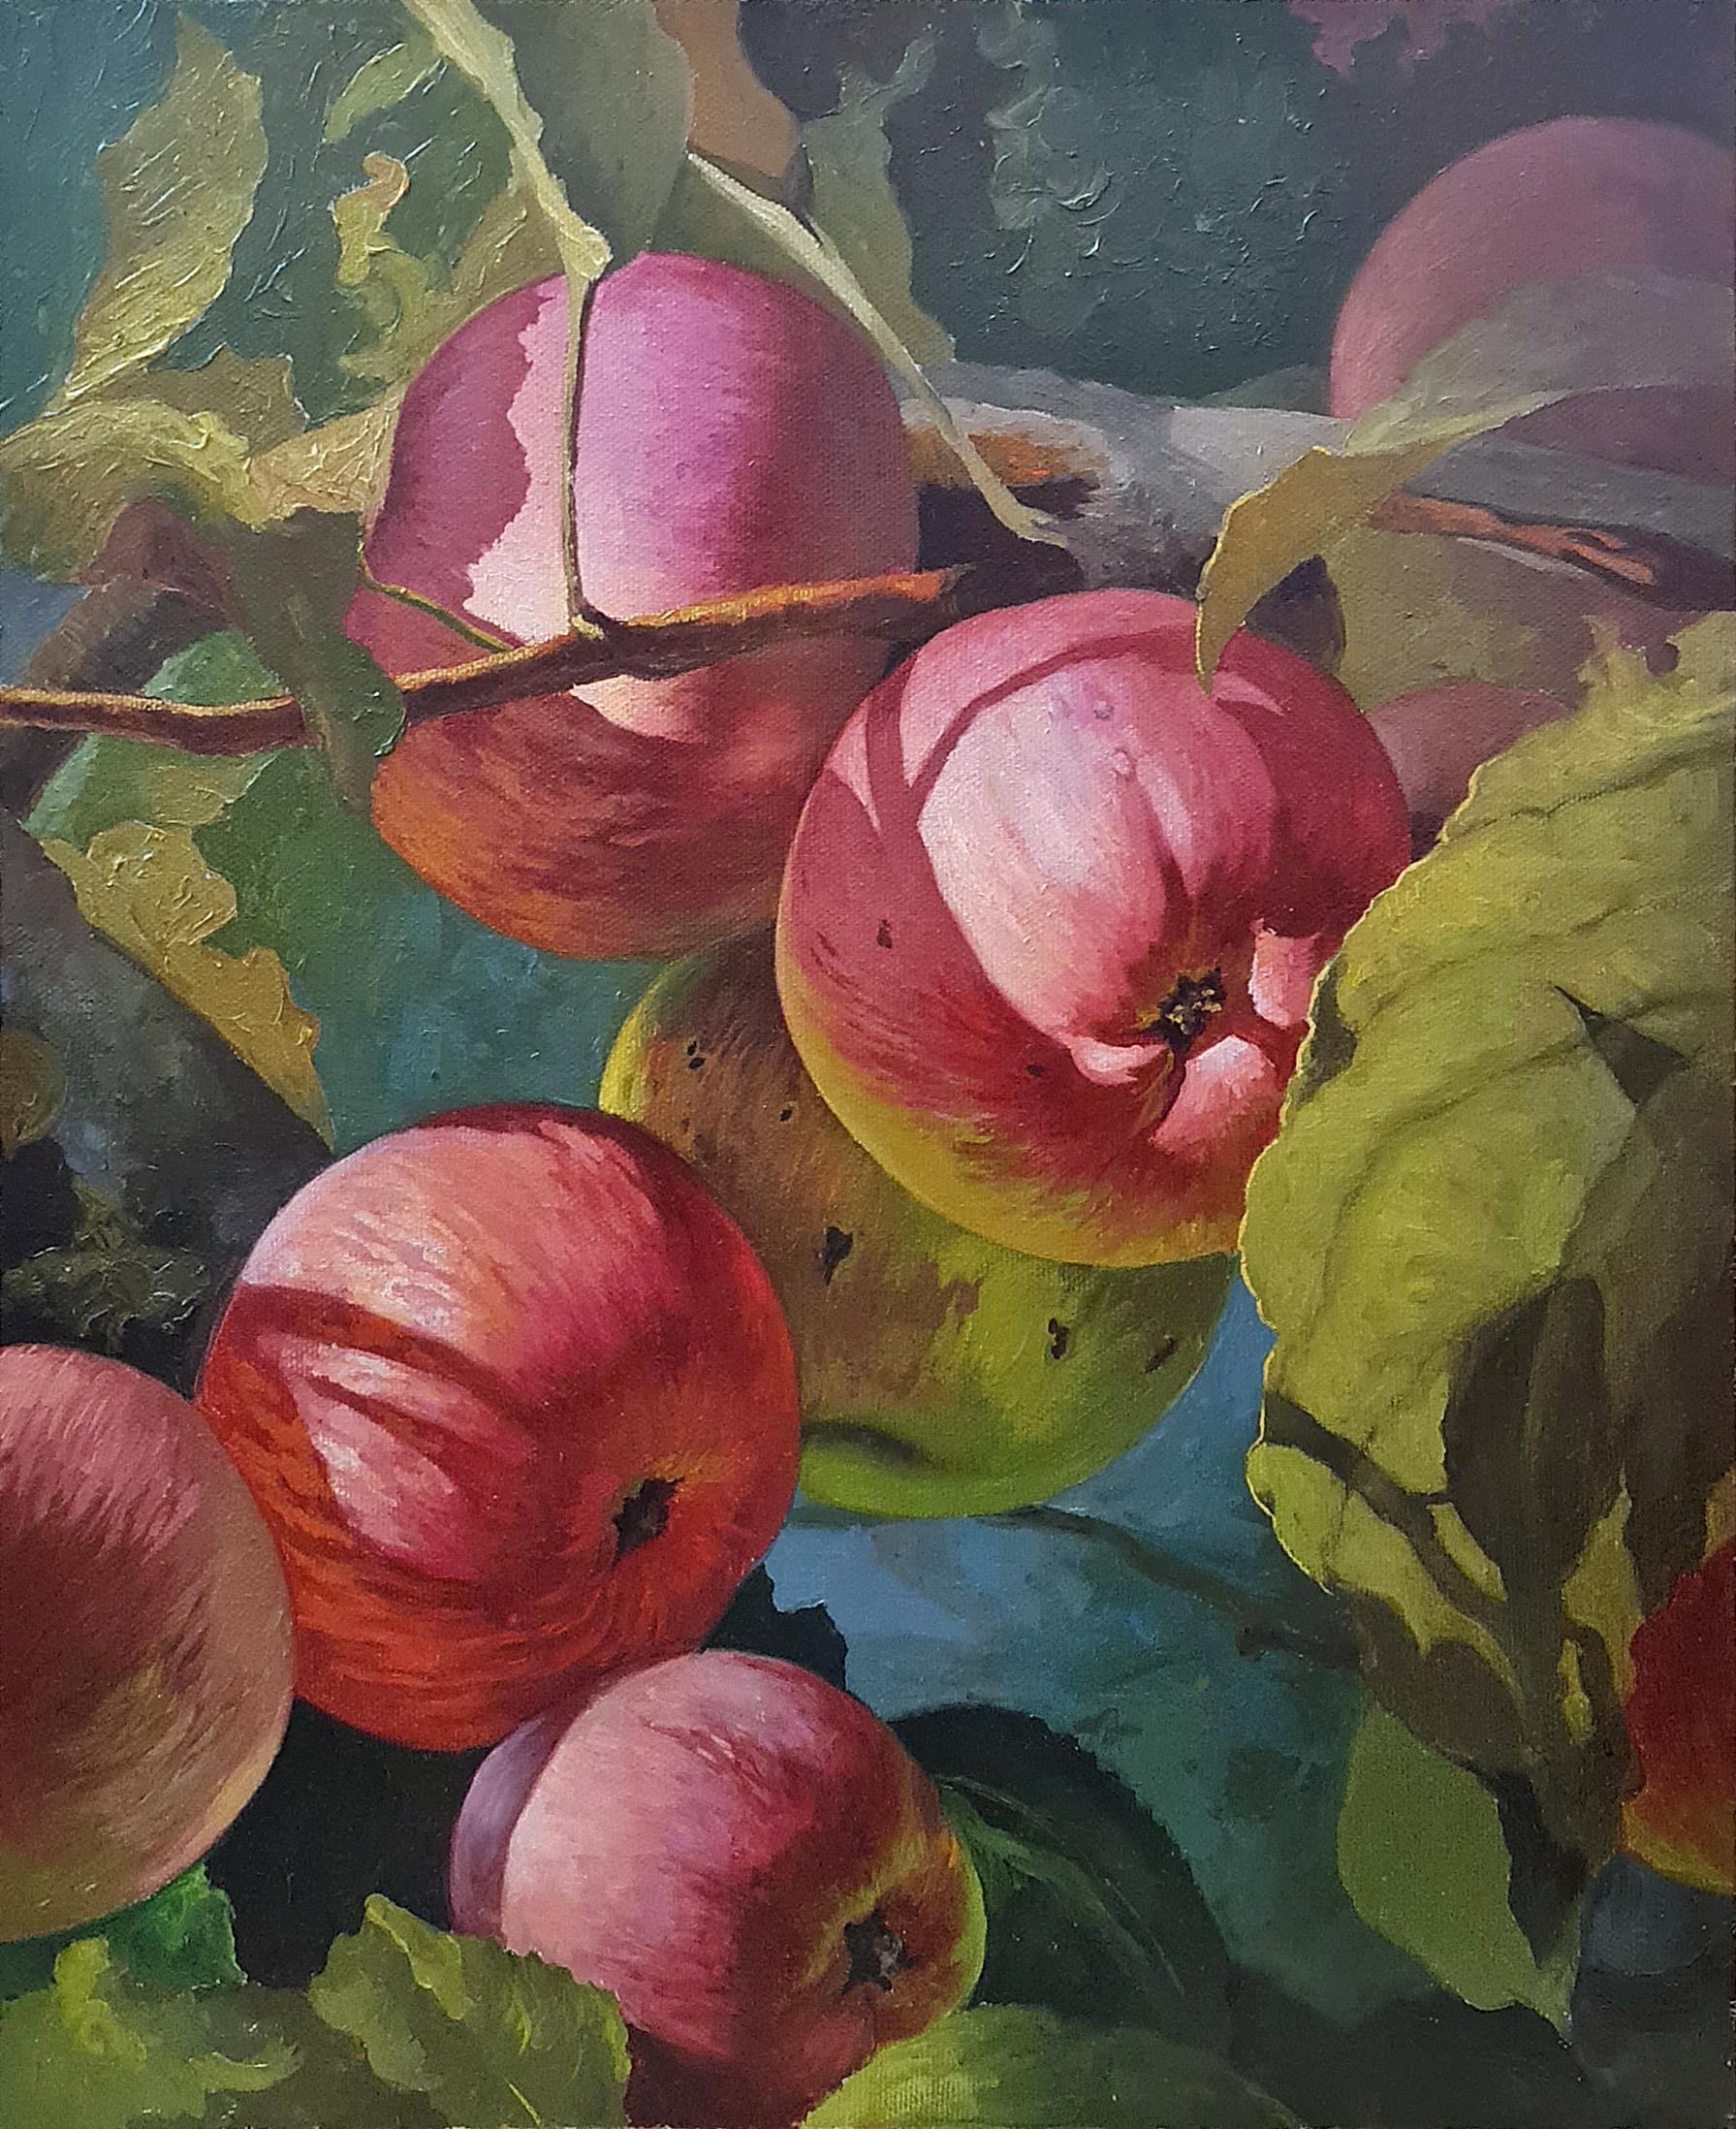 The paintings are drawn with oil on the canvas.
The beautiful, inspiring summer landscape with apples sets you up for 100% positive and a burst of energy. This is a real vitamin boost. I want to bite an apple; they painted so realistically. 

The